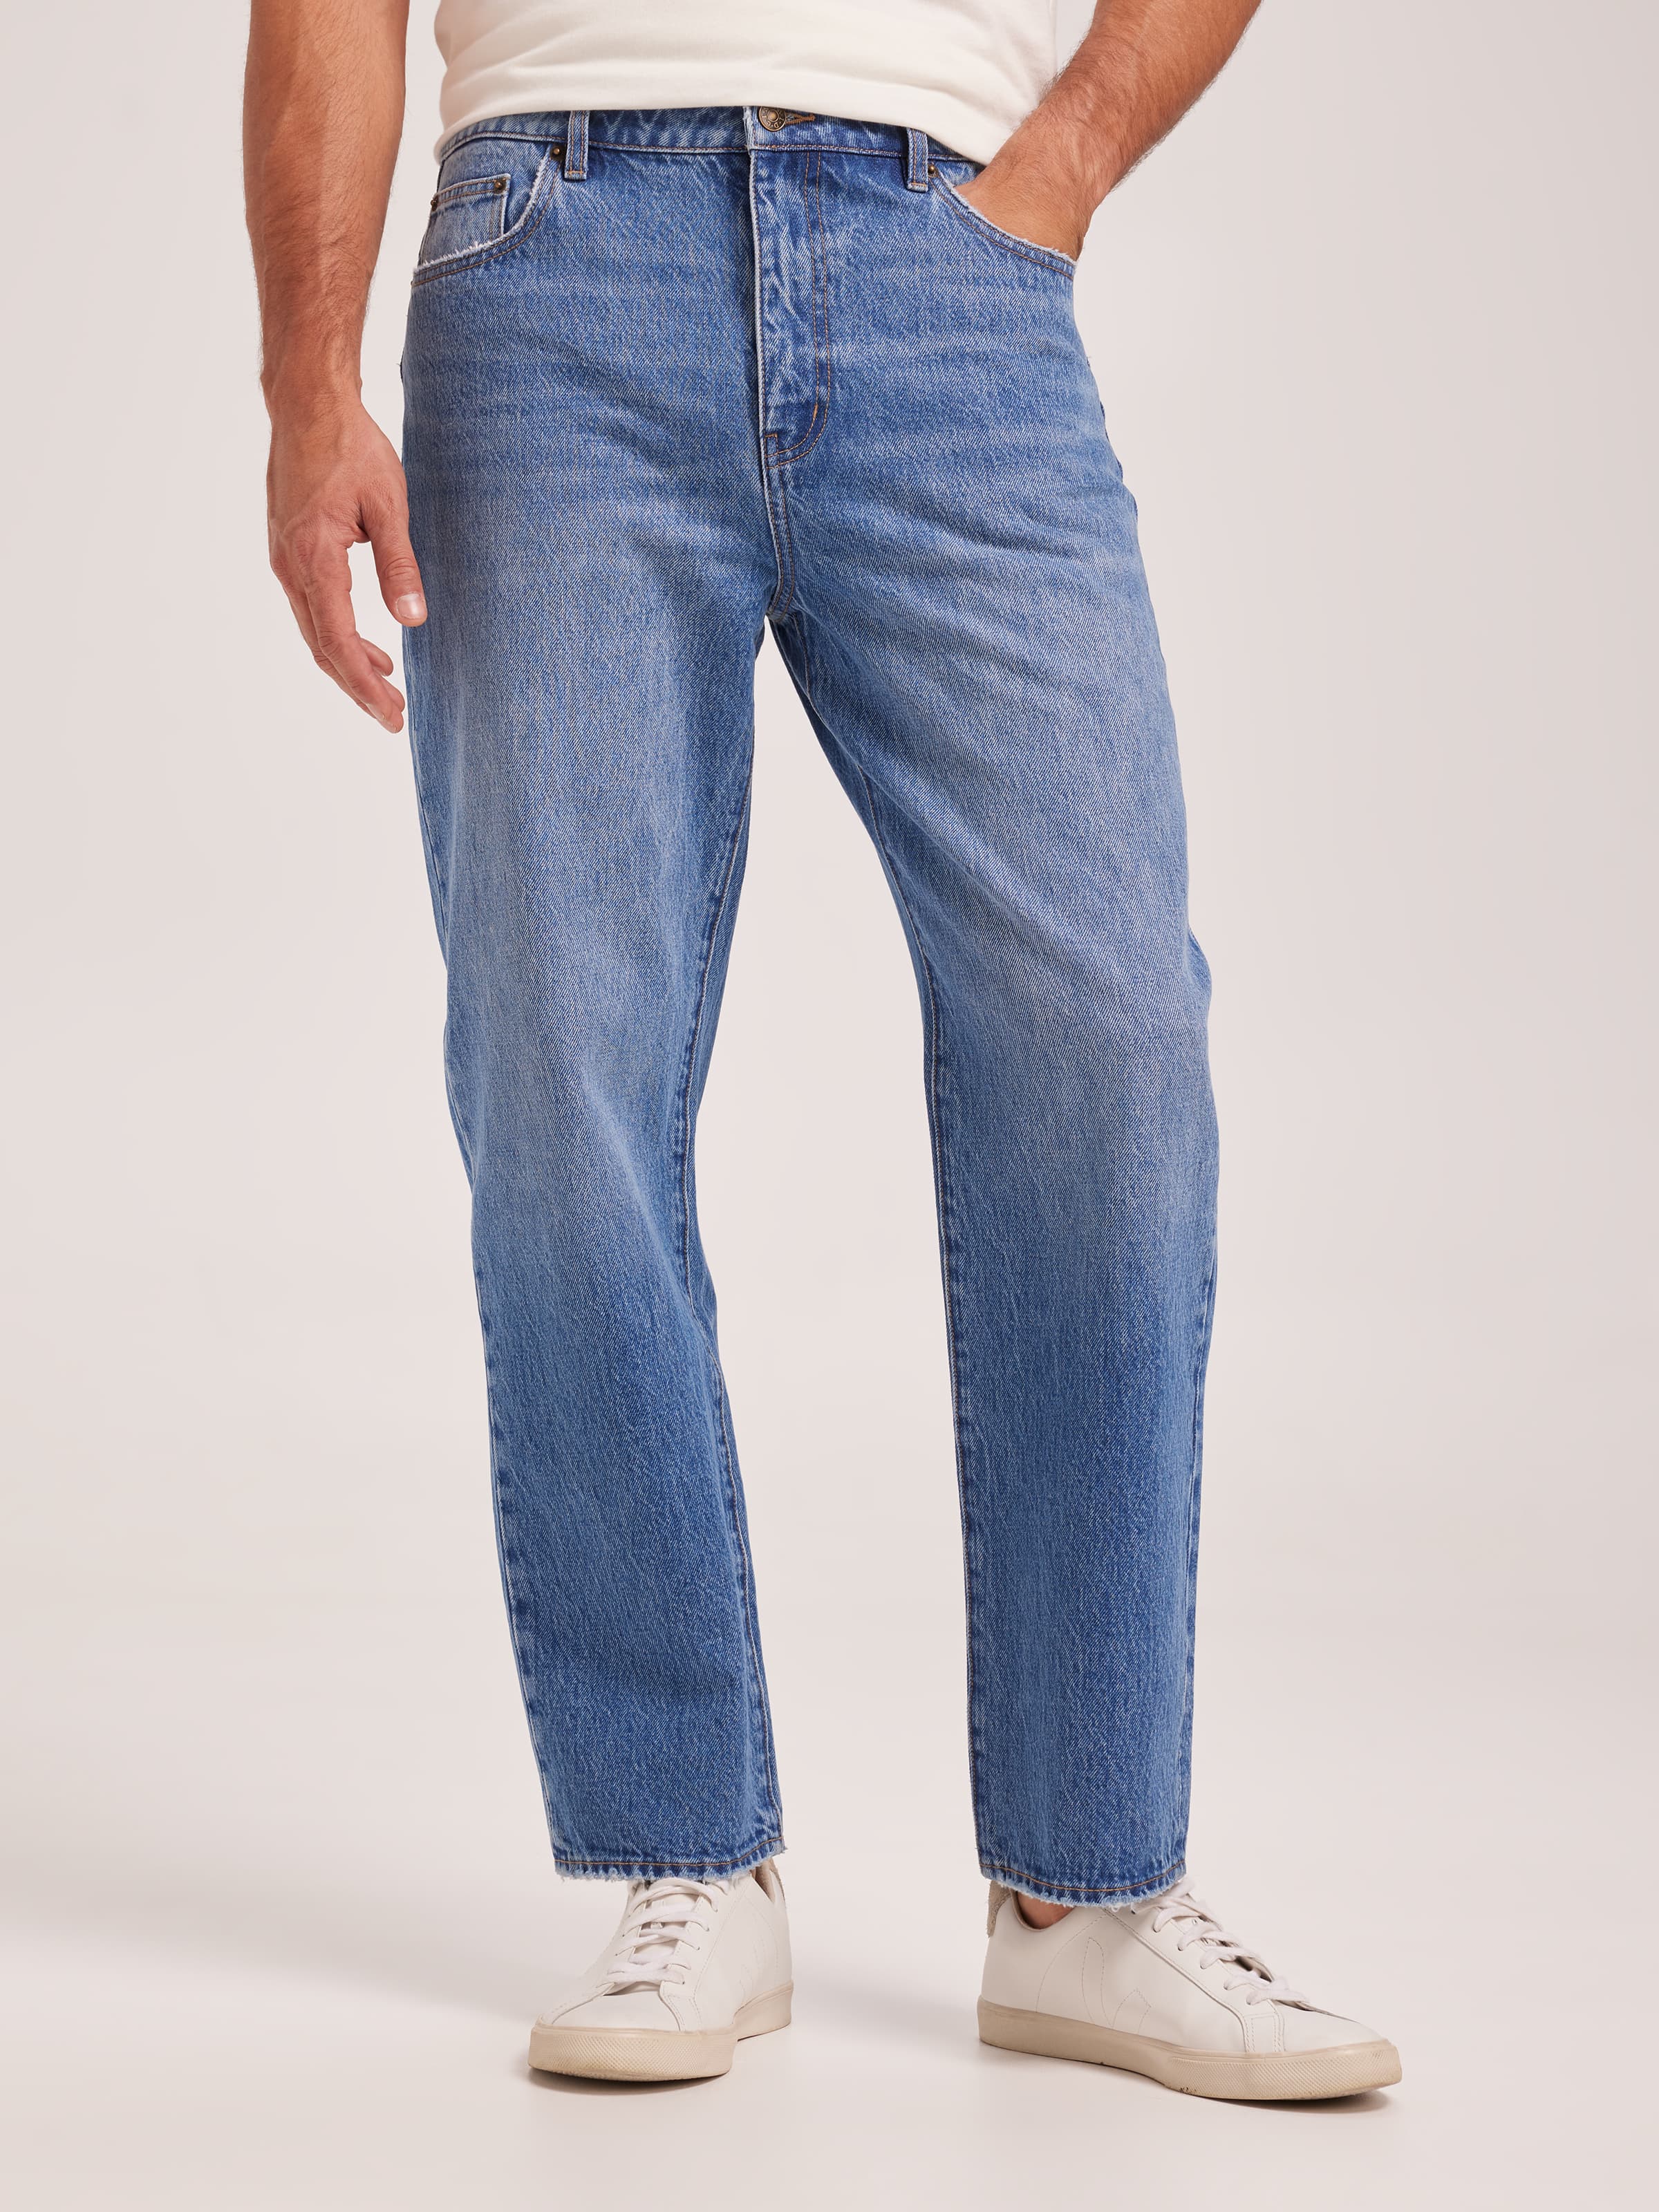 R5 Baggy Jean In Crafted Blue